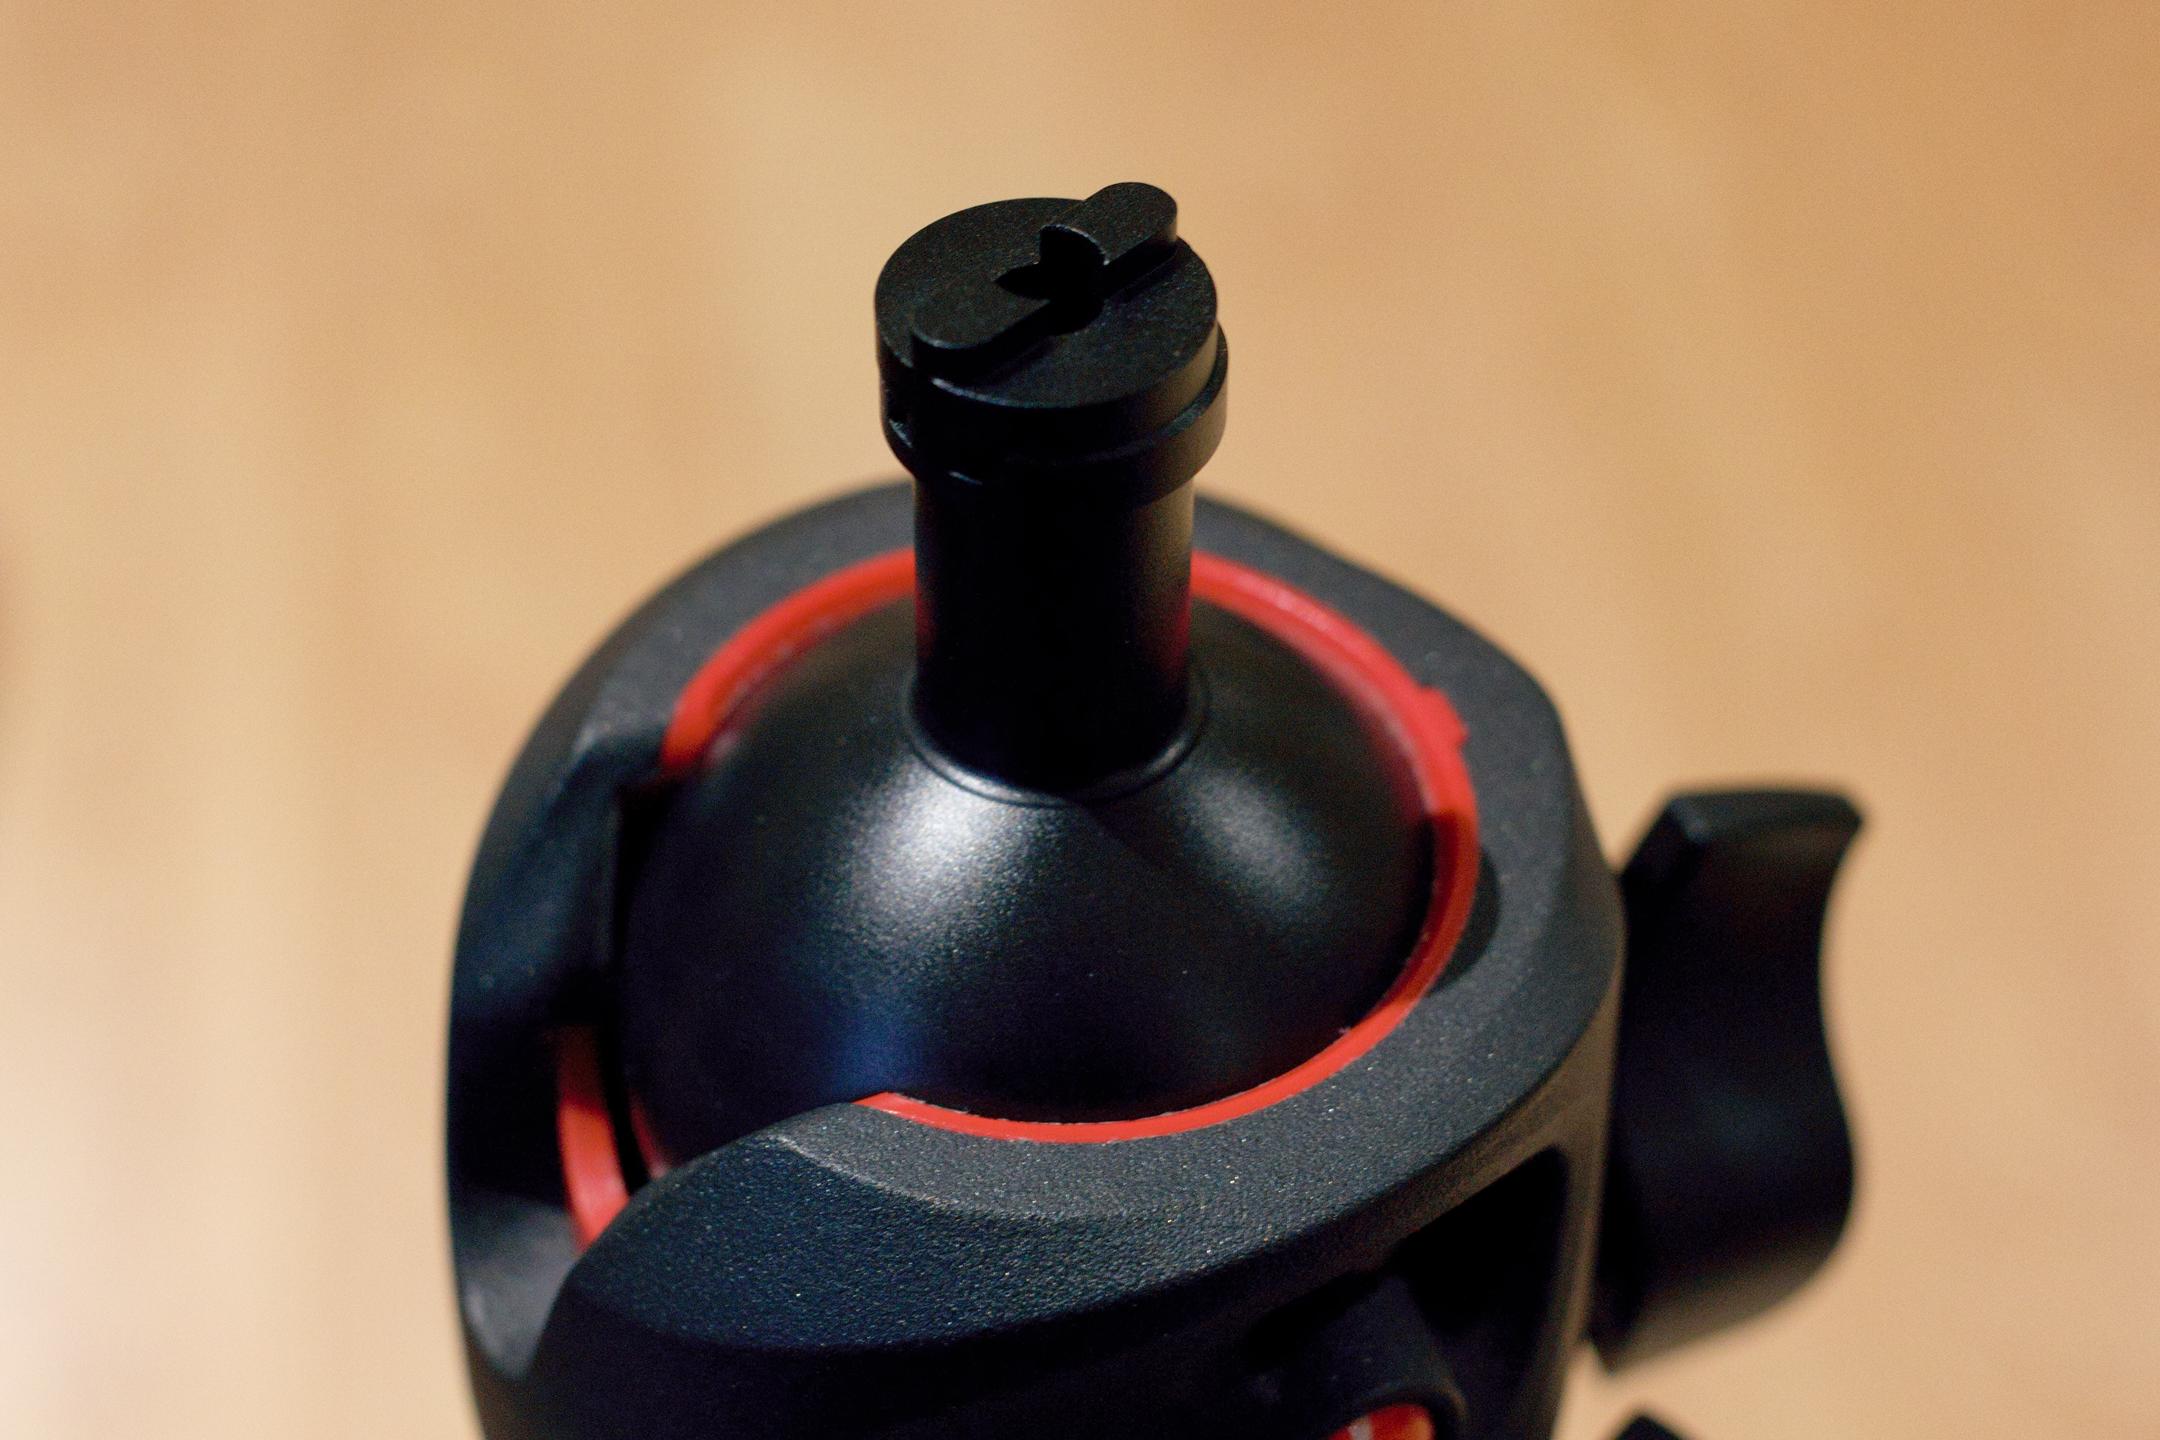 The iShoot adapter on my Manfrotto ball head